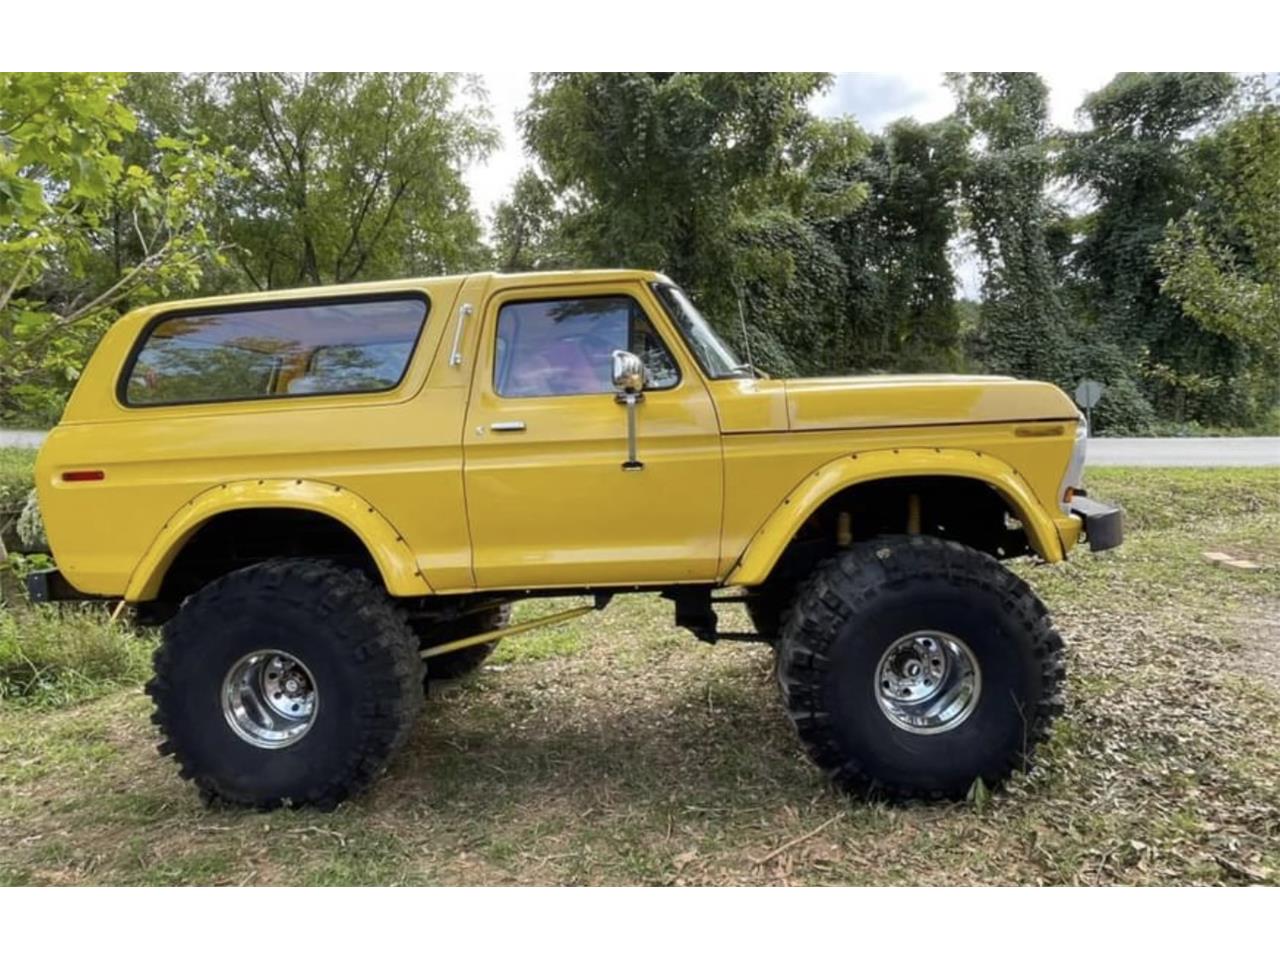 For Sale: 1978 Ford Bronco in Talking Rock, Georgia for sale in Talking Rock, GA